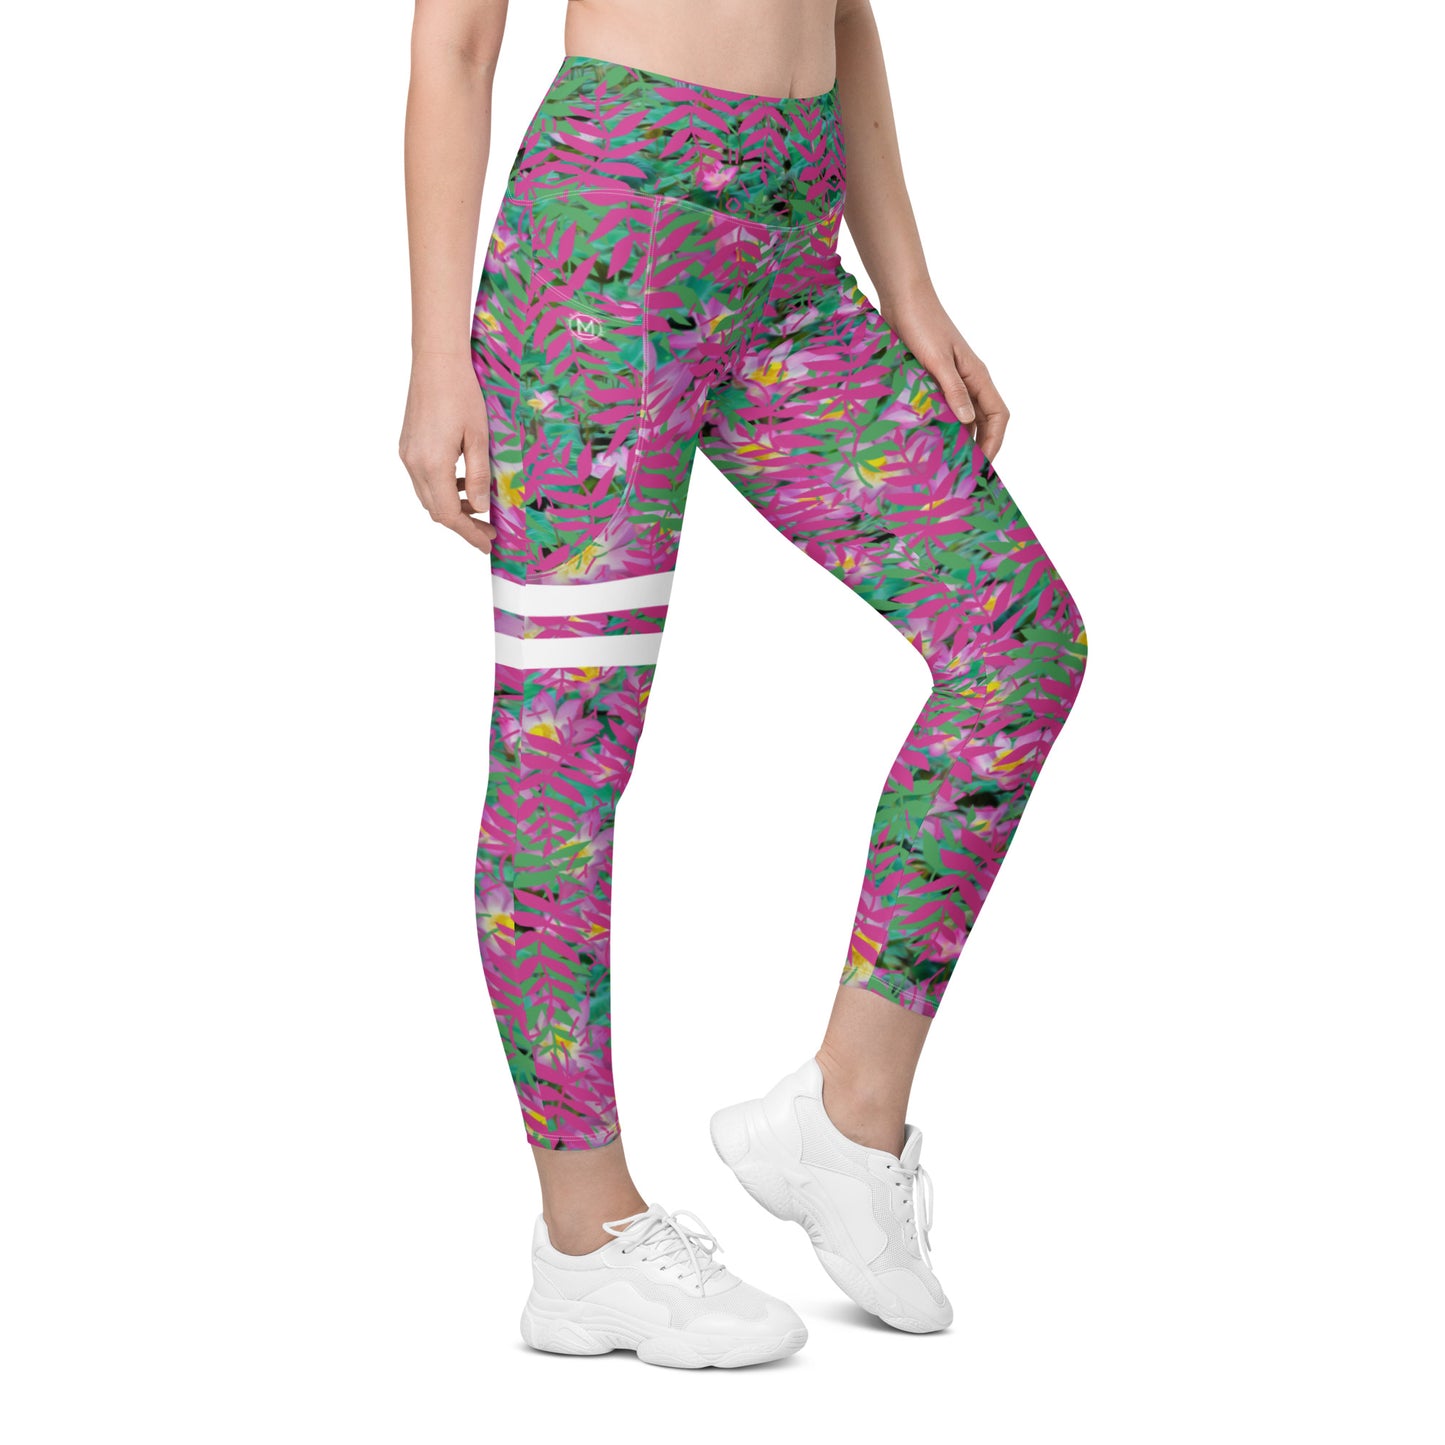 Leggings with pockets - FREE SHIPPING!